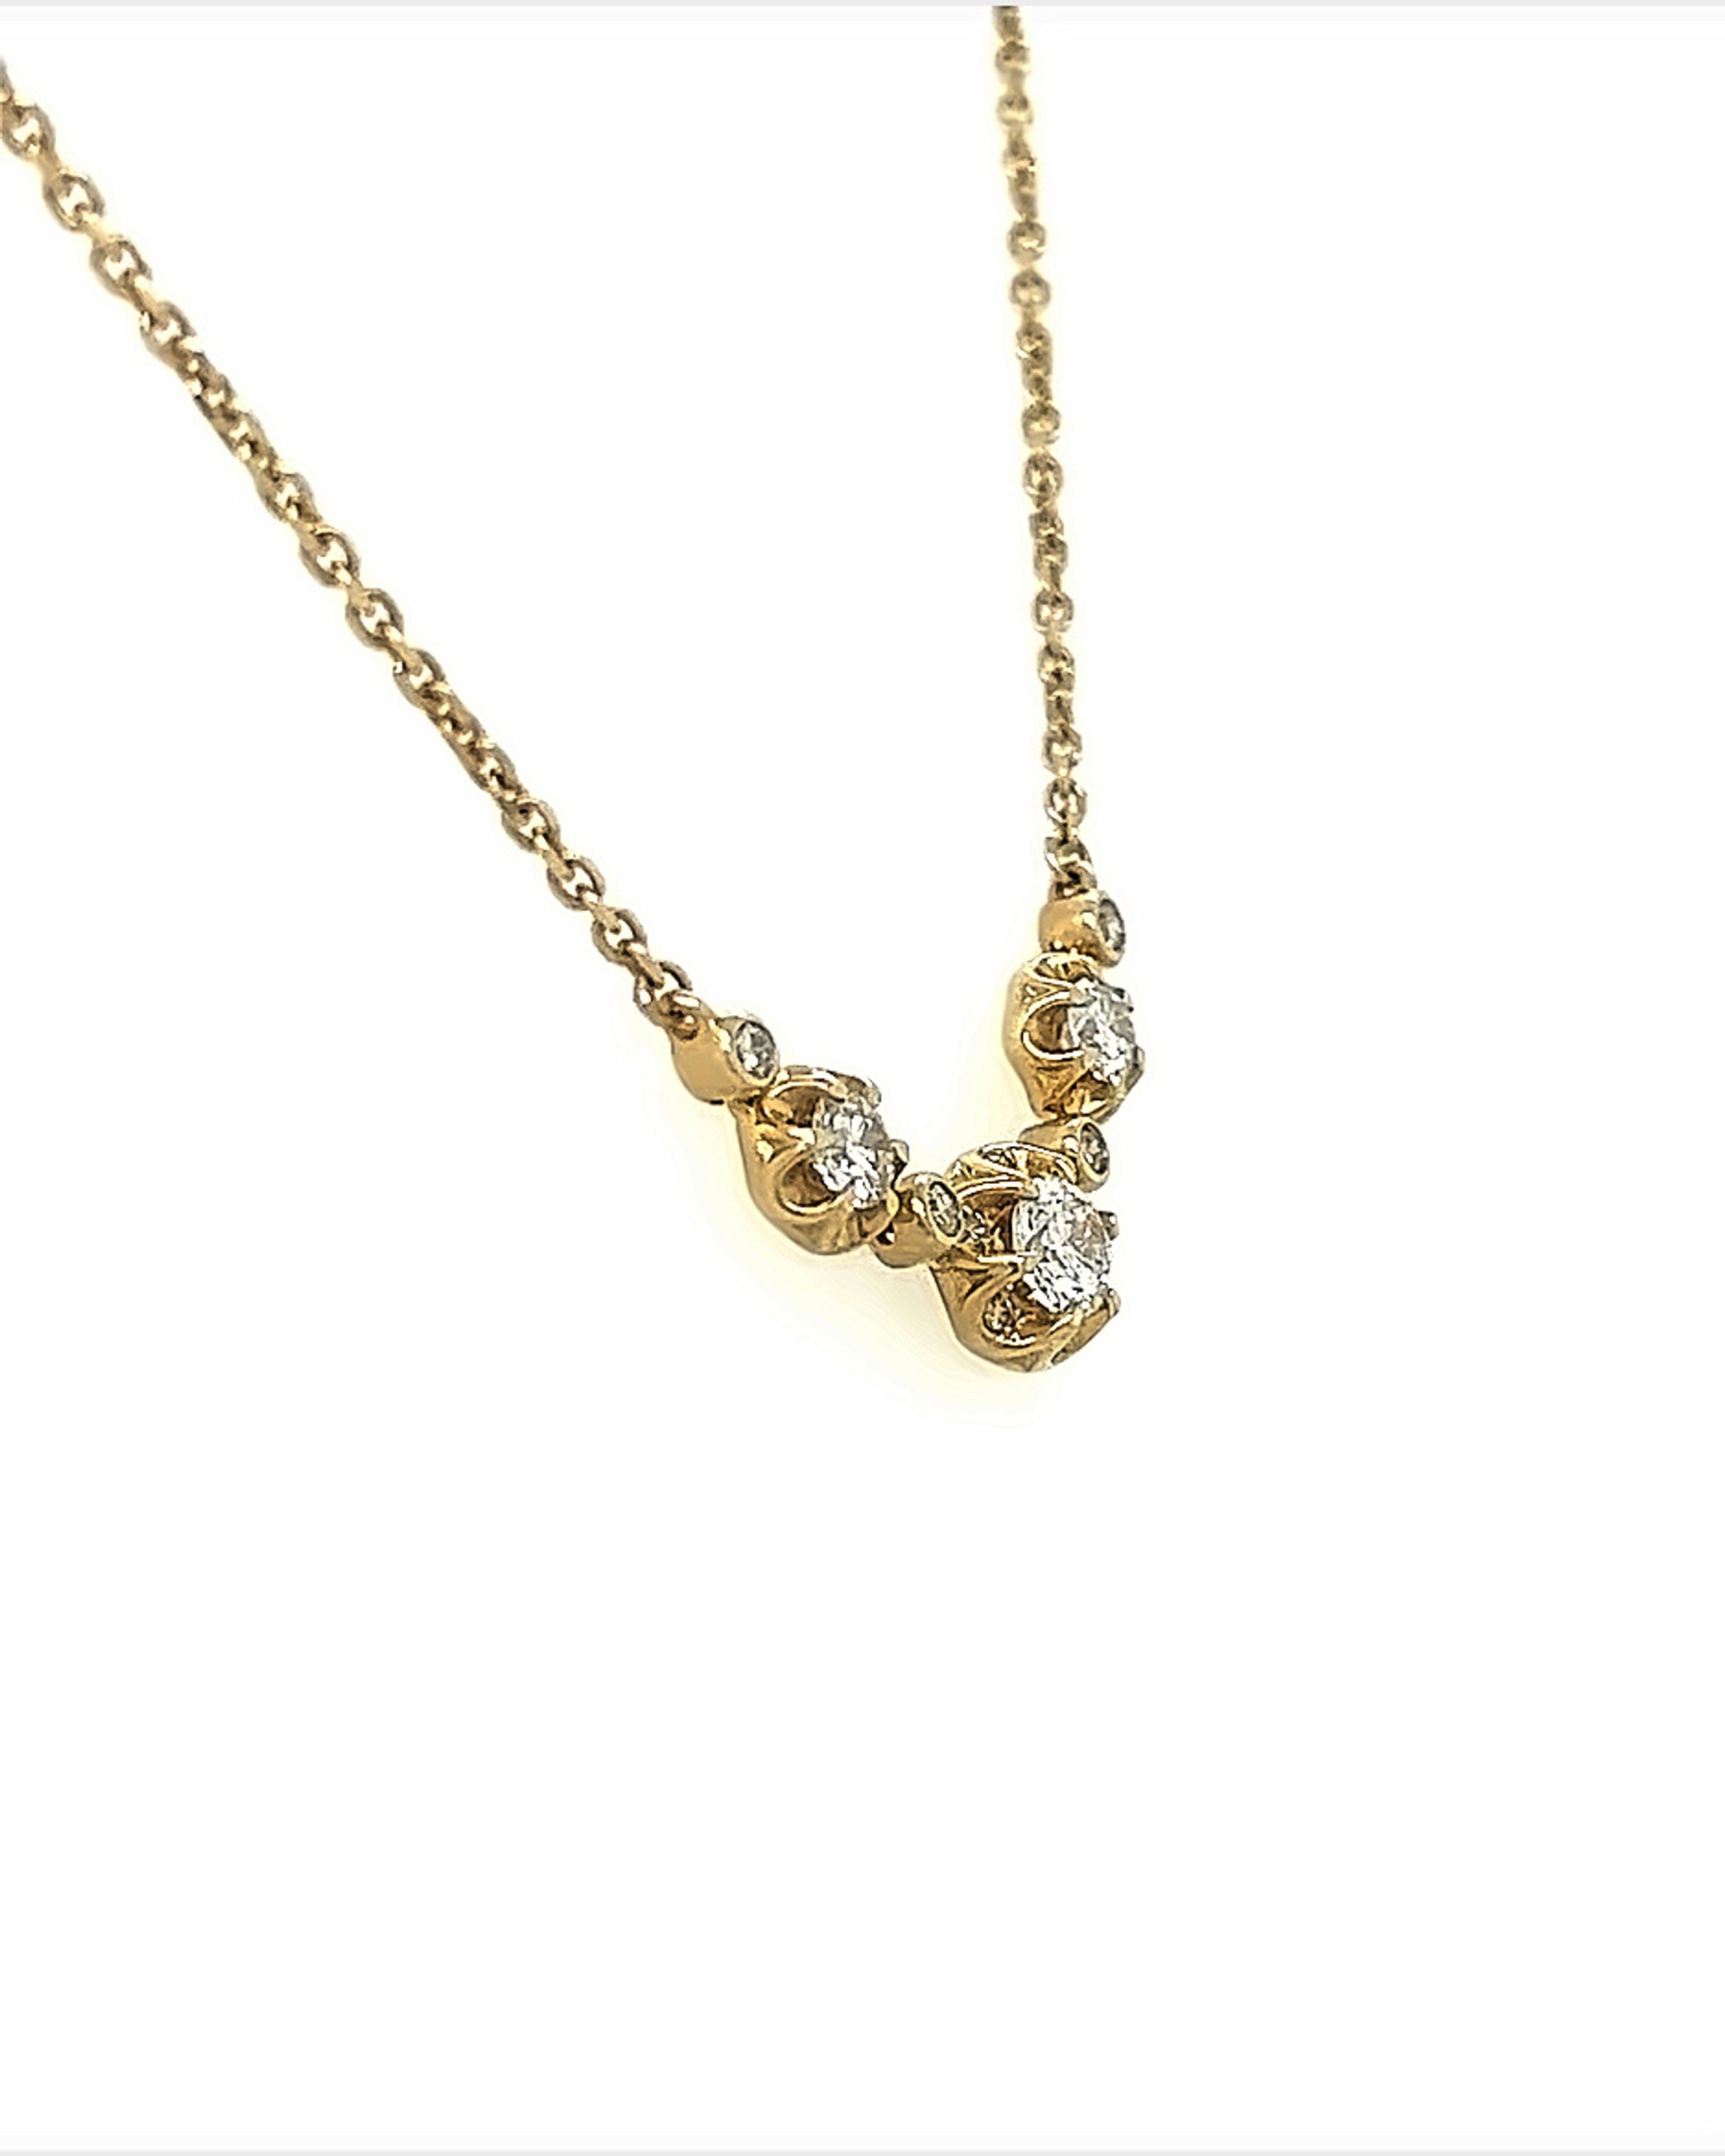 14KT YELLOW GOLD 3 DIAMOND STAGES PENDANT